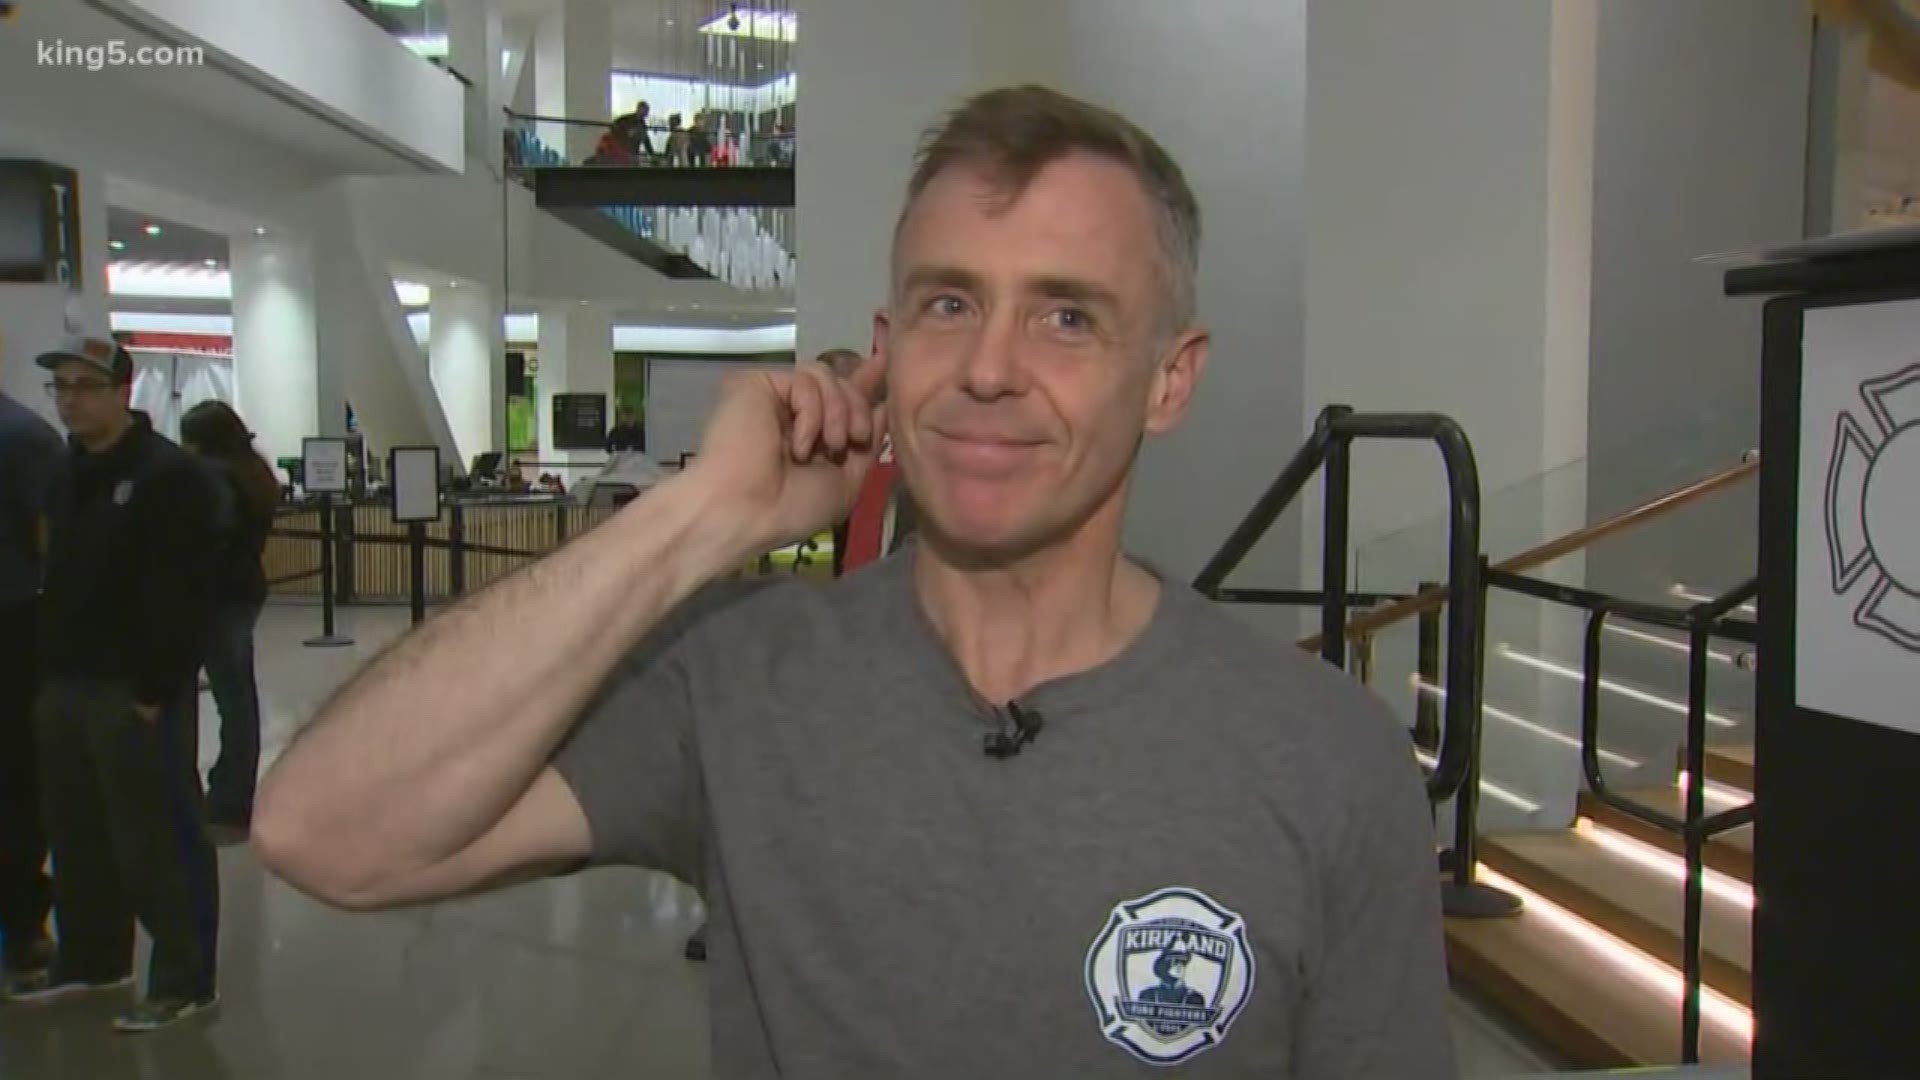 Actor David Eigenberg joined firefighters from around the Pacific Northwest for the 2019 Leukemia & Lymphoma Firefighter Stairclimb at the Columbia Center in downtown Seattle.